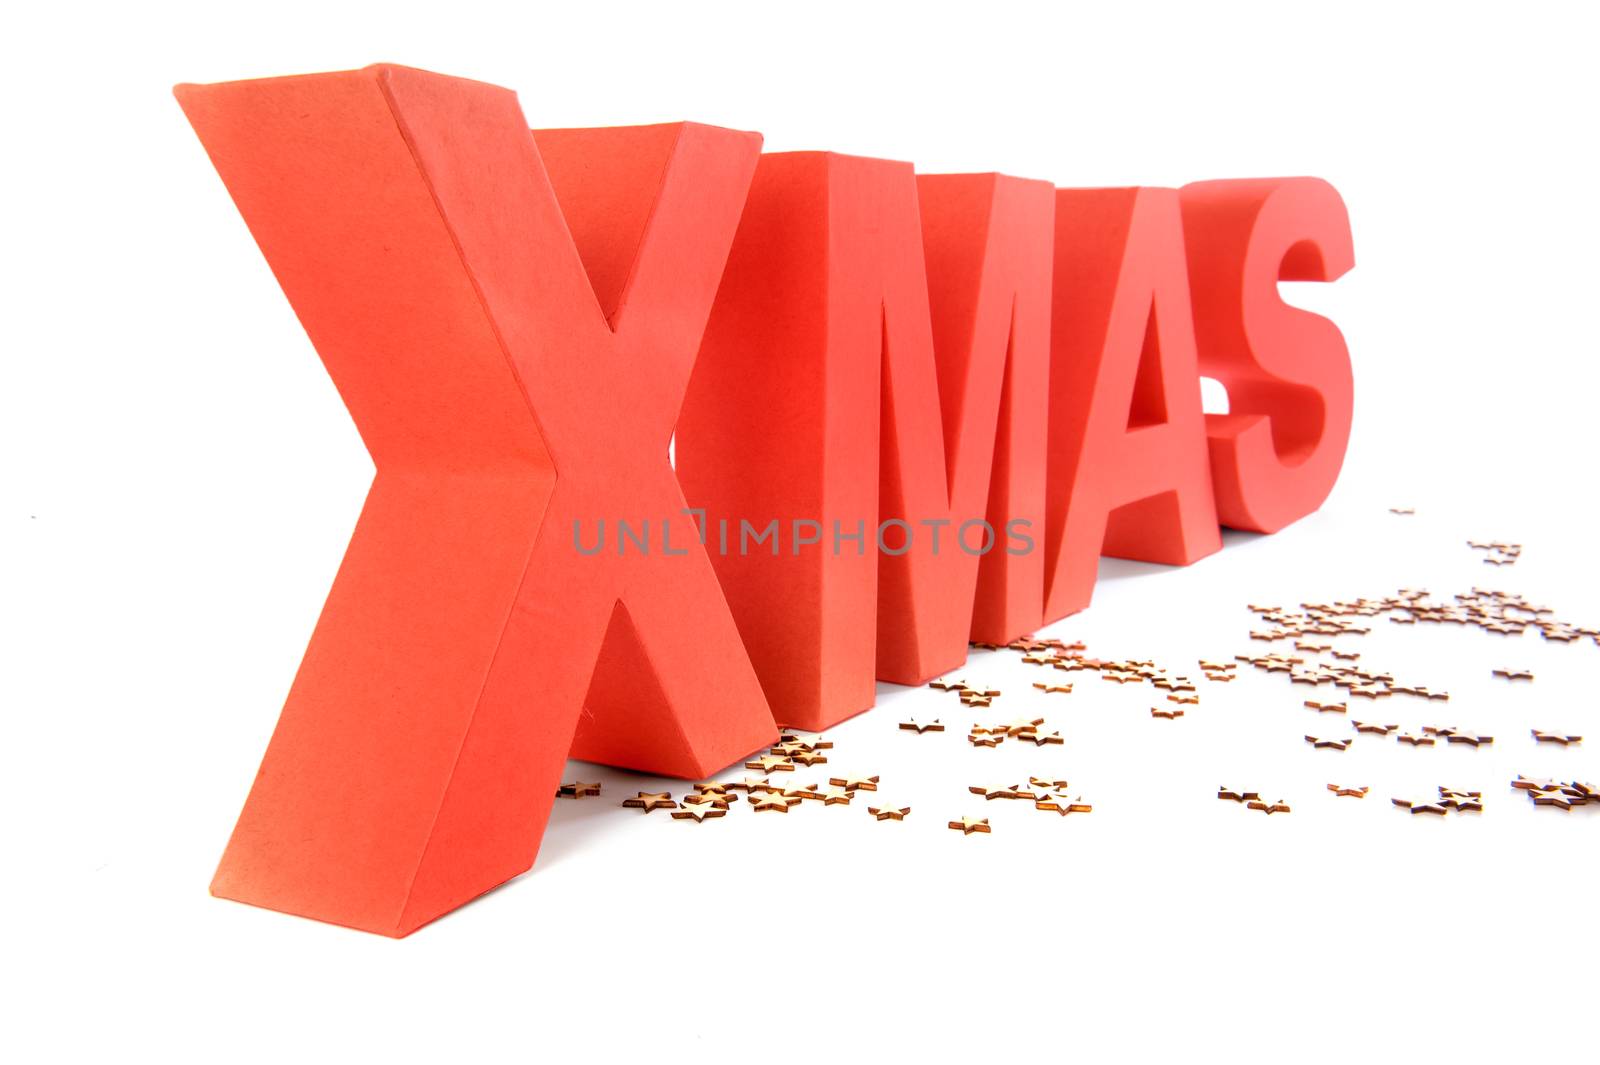 Xmas, written in red letters on a white background with stars